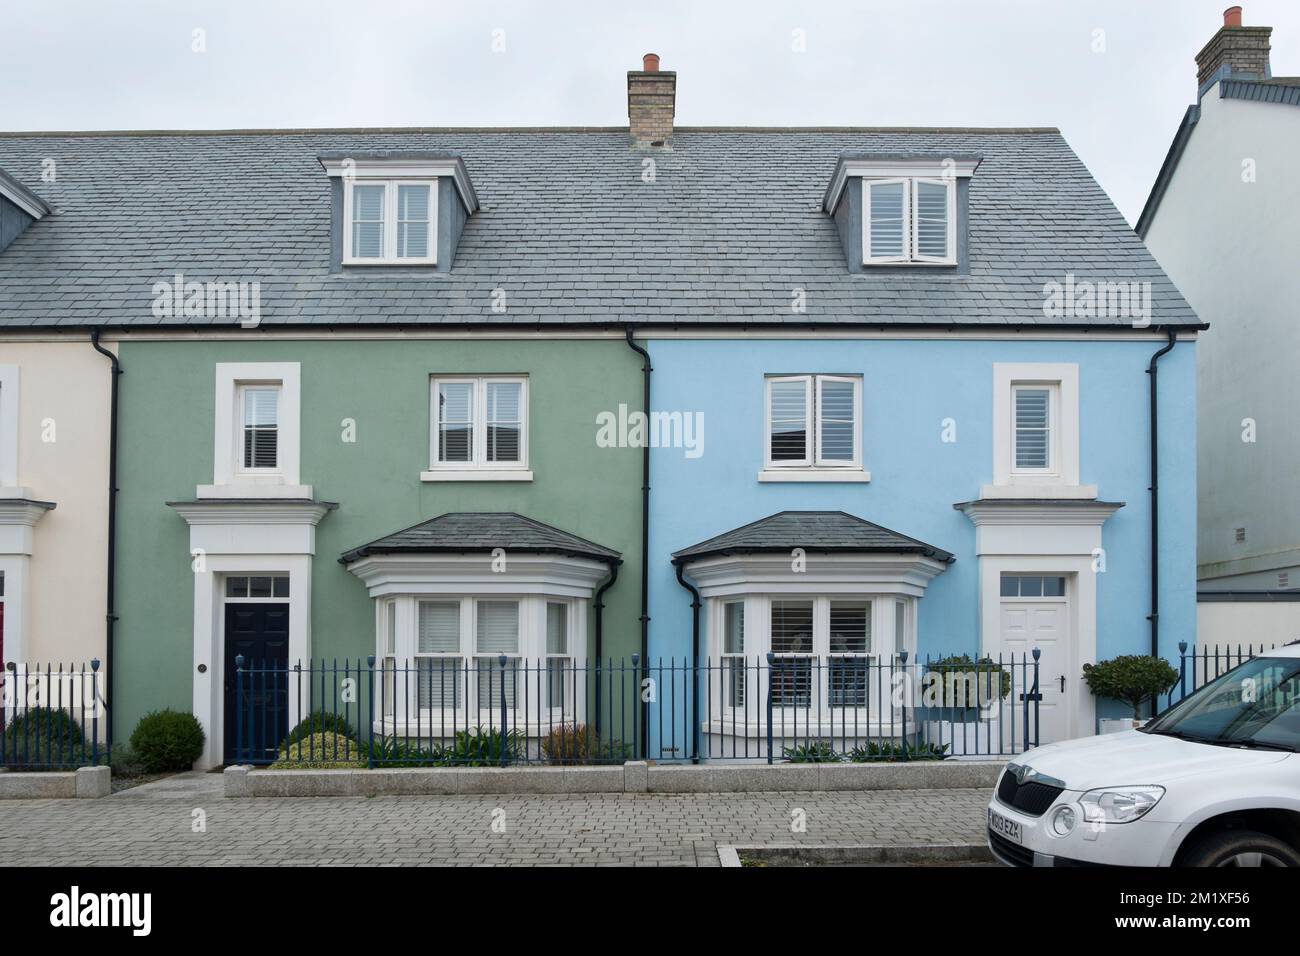 A row of three storey, terraced houses on Stret Euther Penndragon,Nansledan, a development by the Duchy of Cornwall in Newquay, South West England, UK Stock Photo